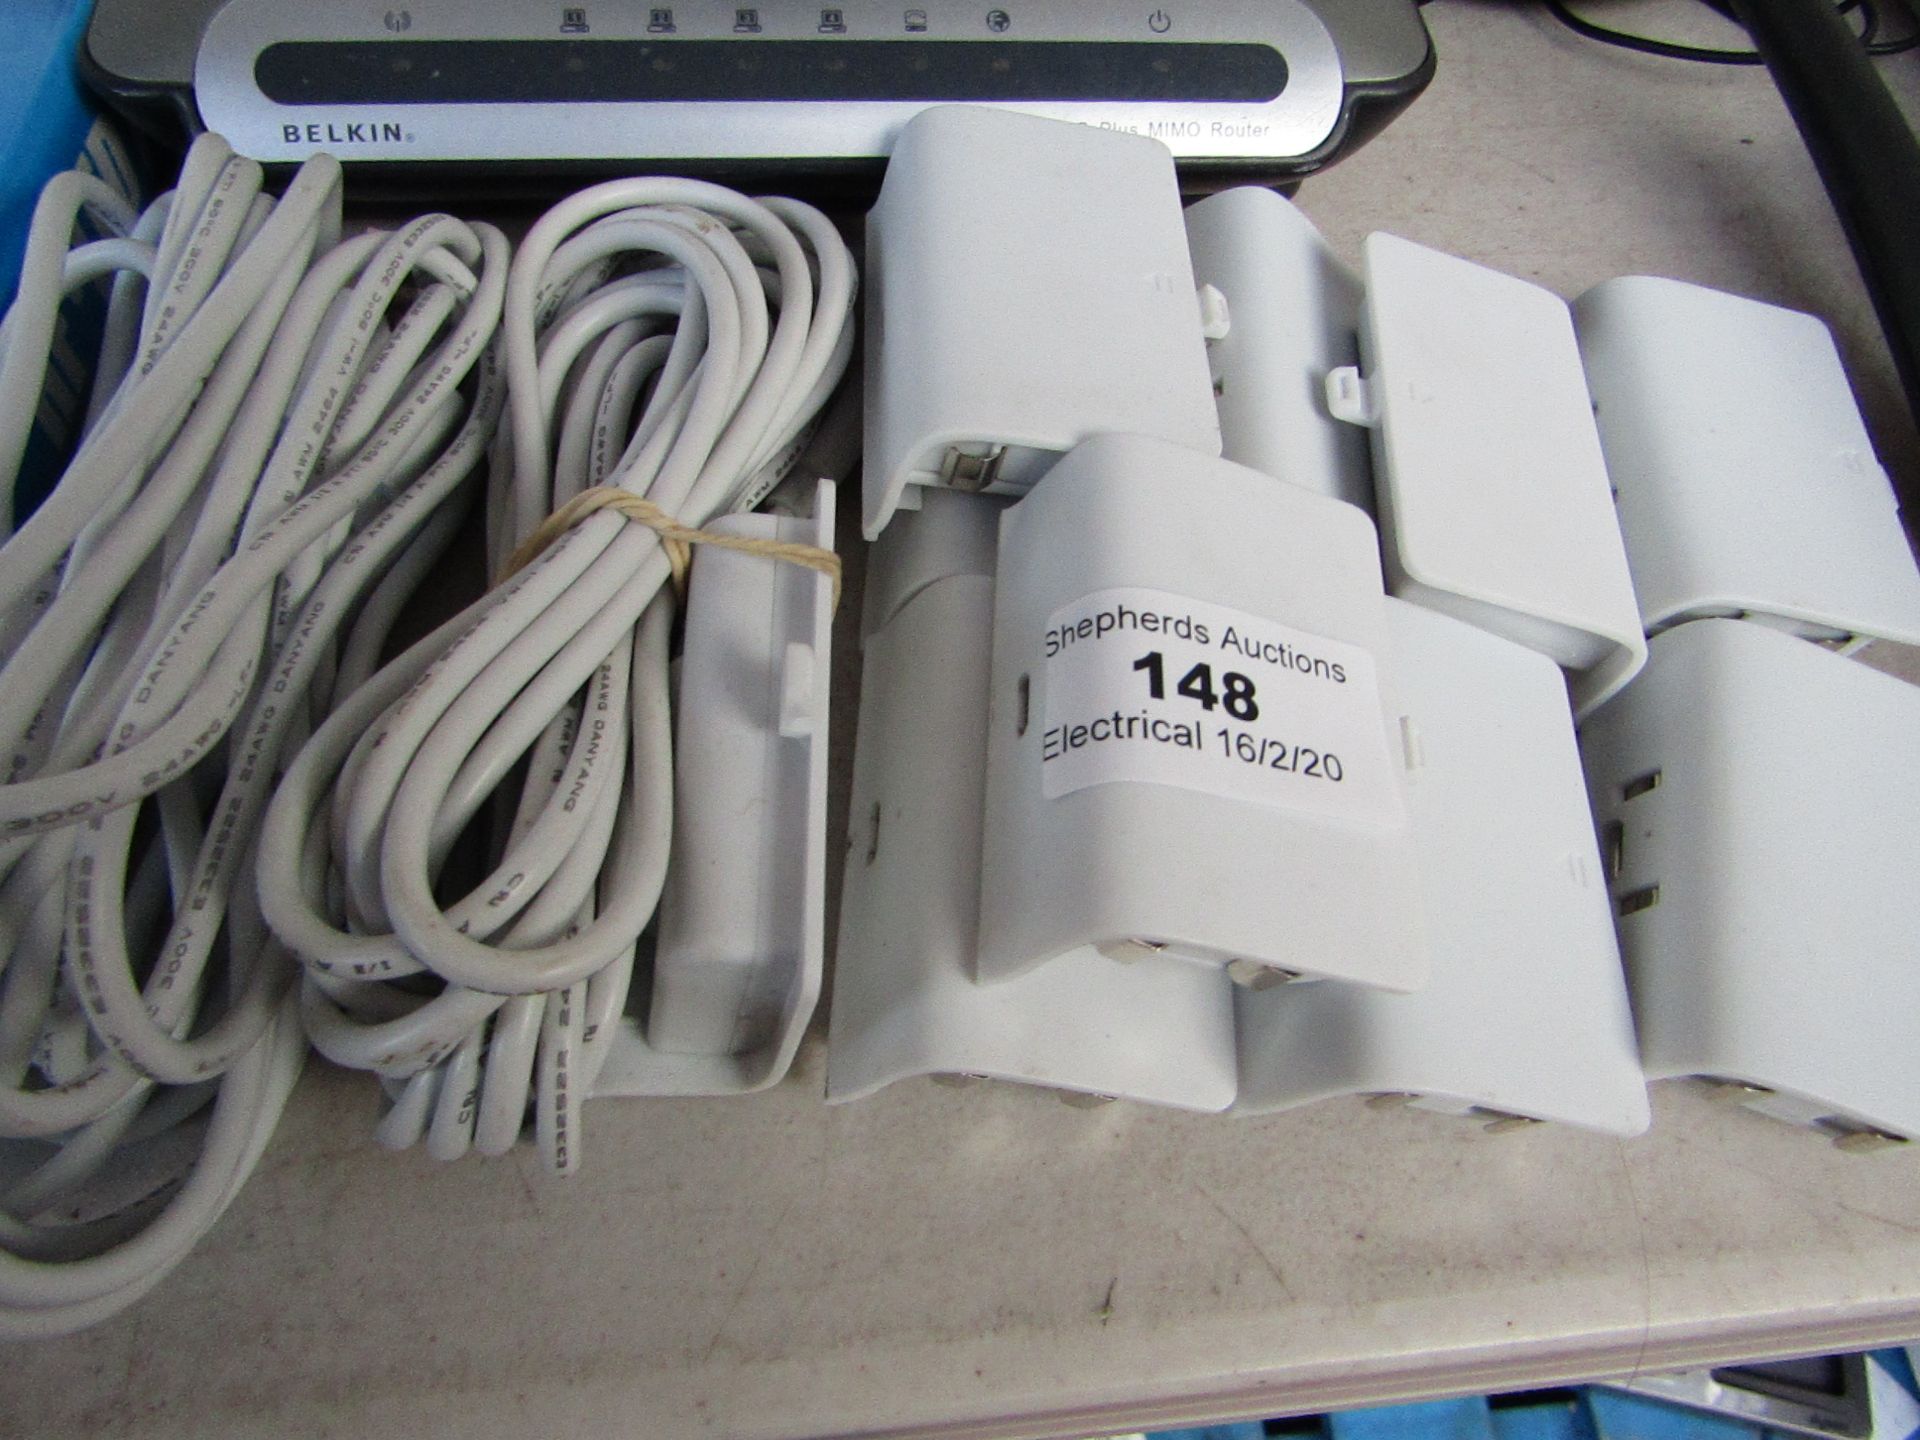 10x XBOX controller battery packs with 2x USB chargers, untested.